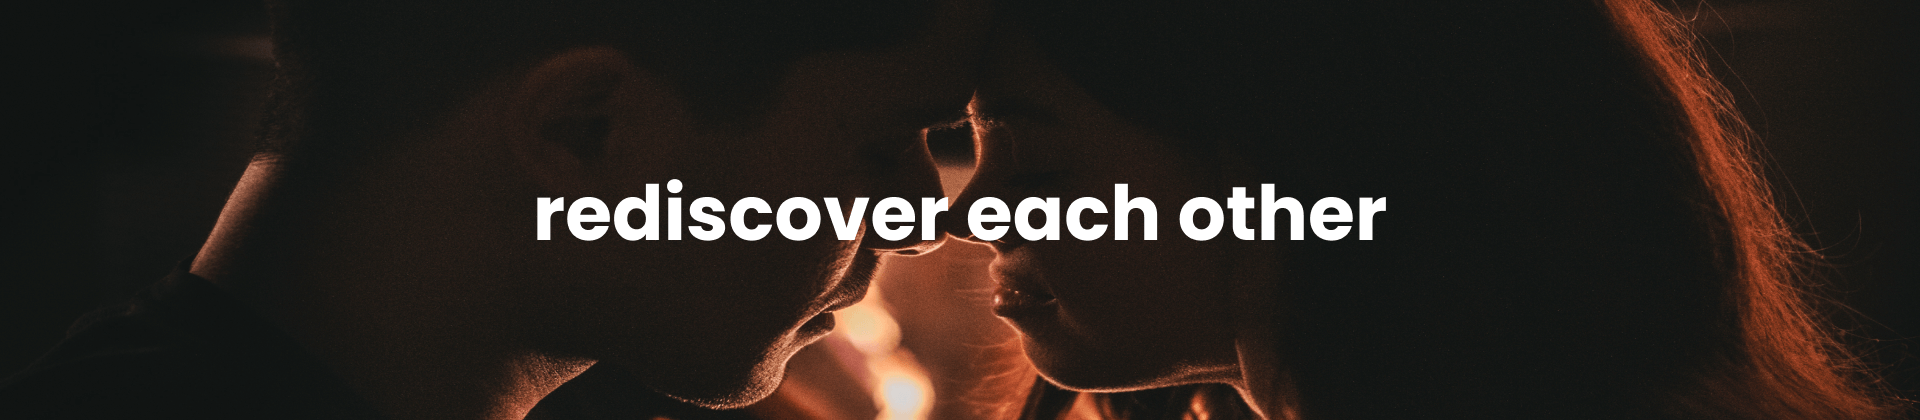 rediscover each other | In Bed editions by The Adventure Challenge